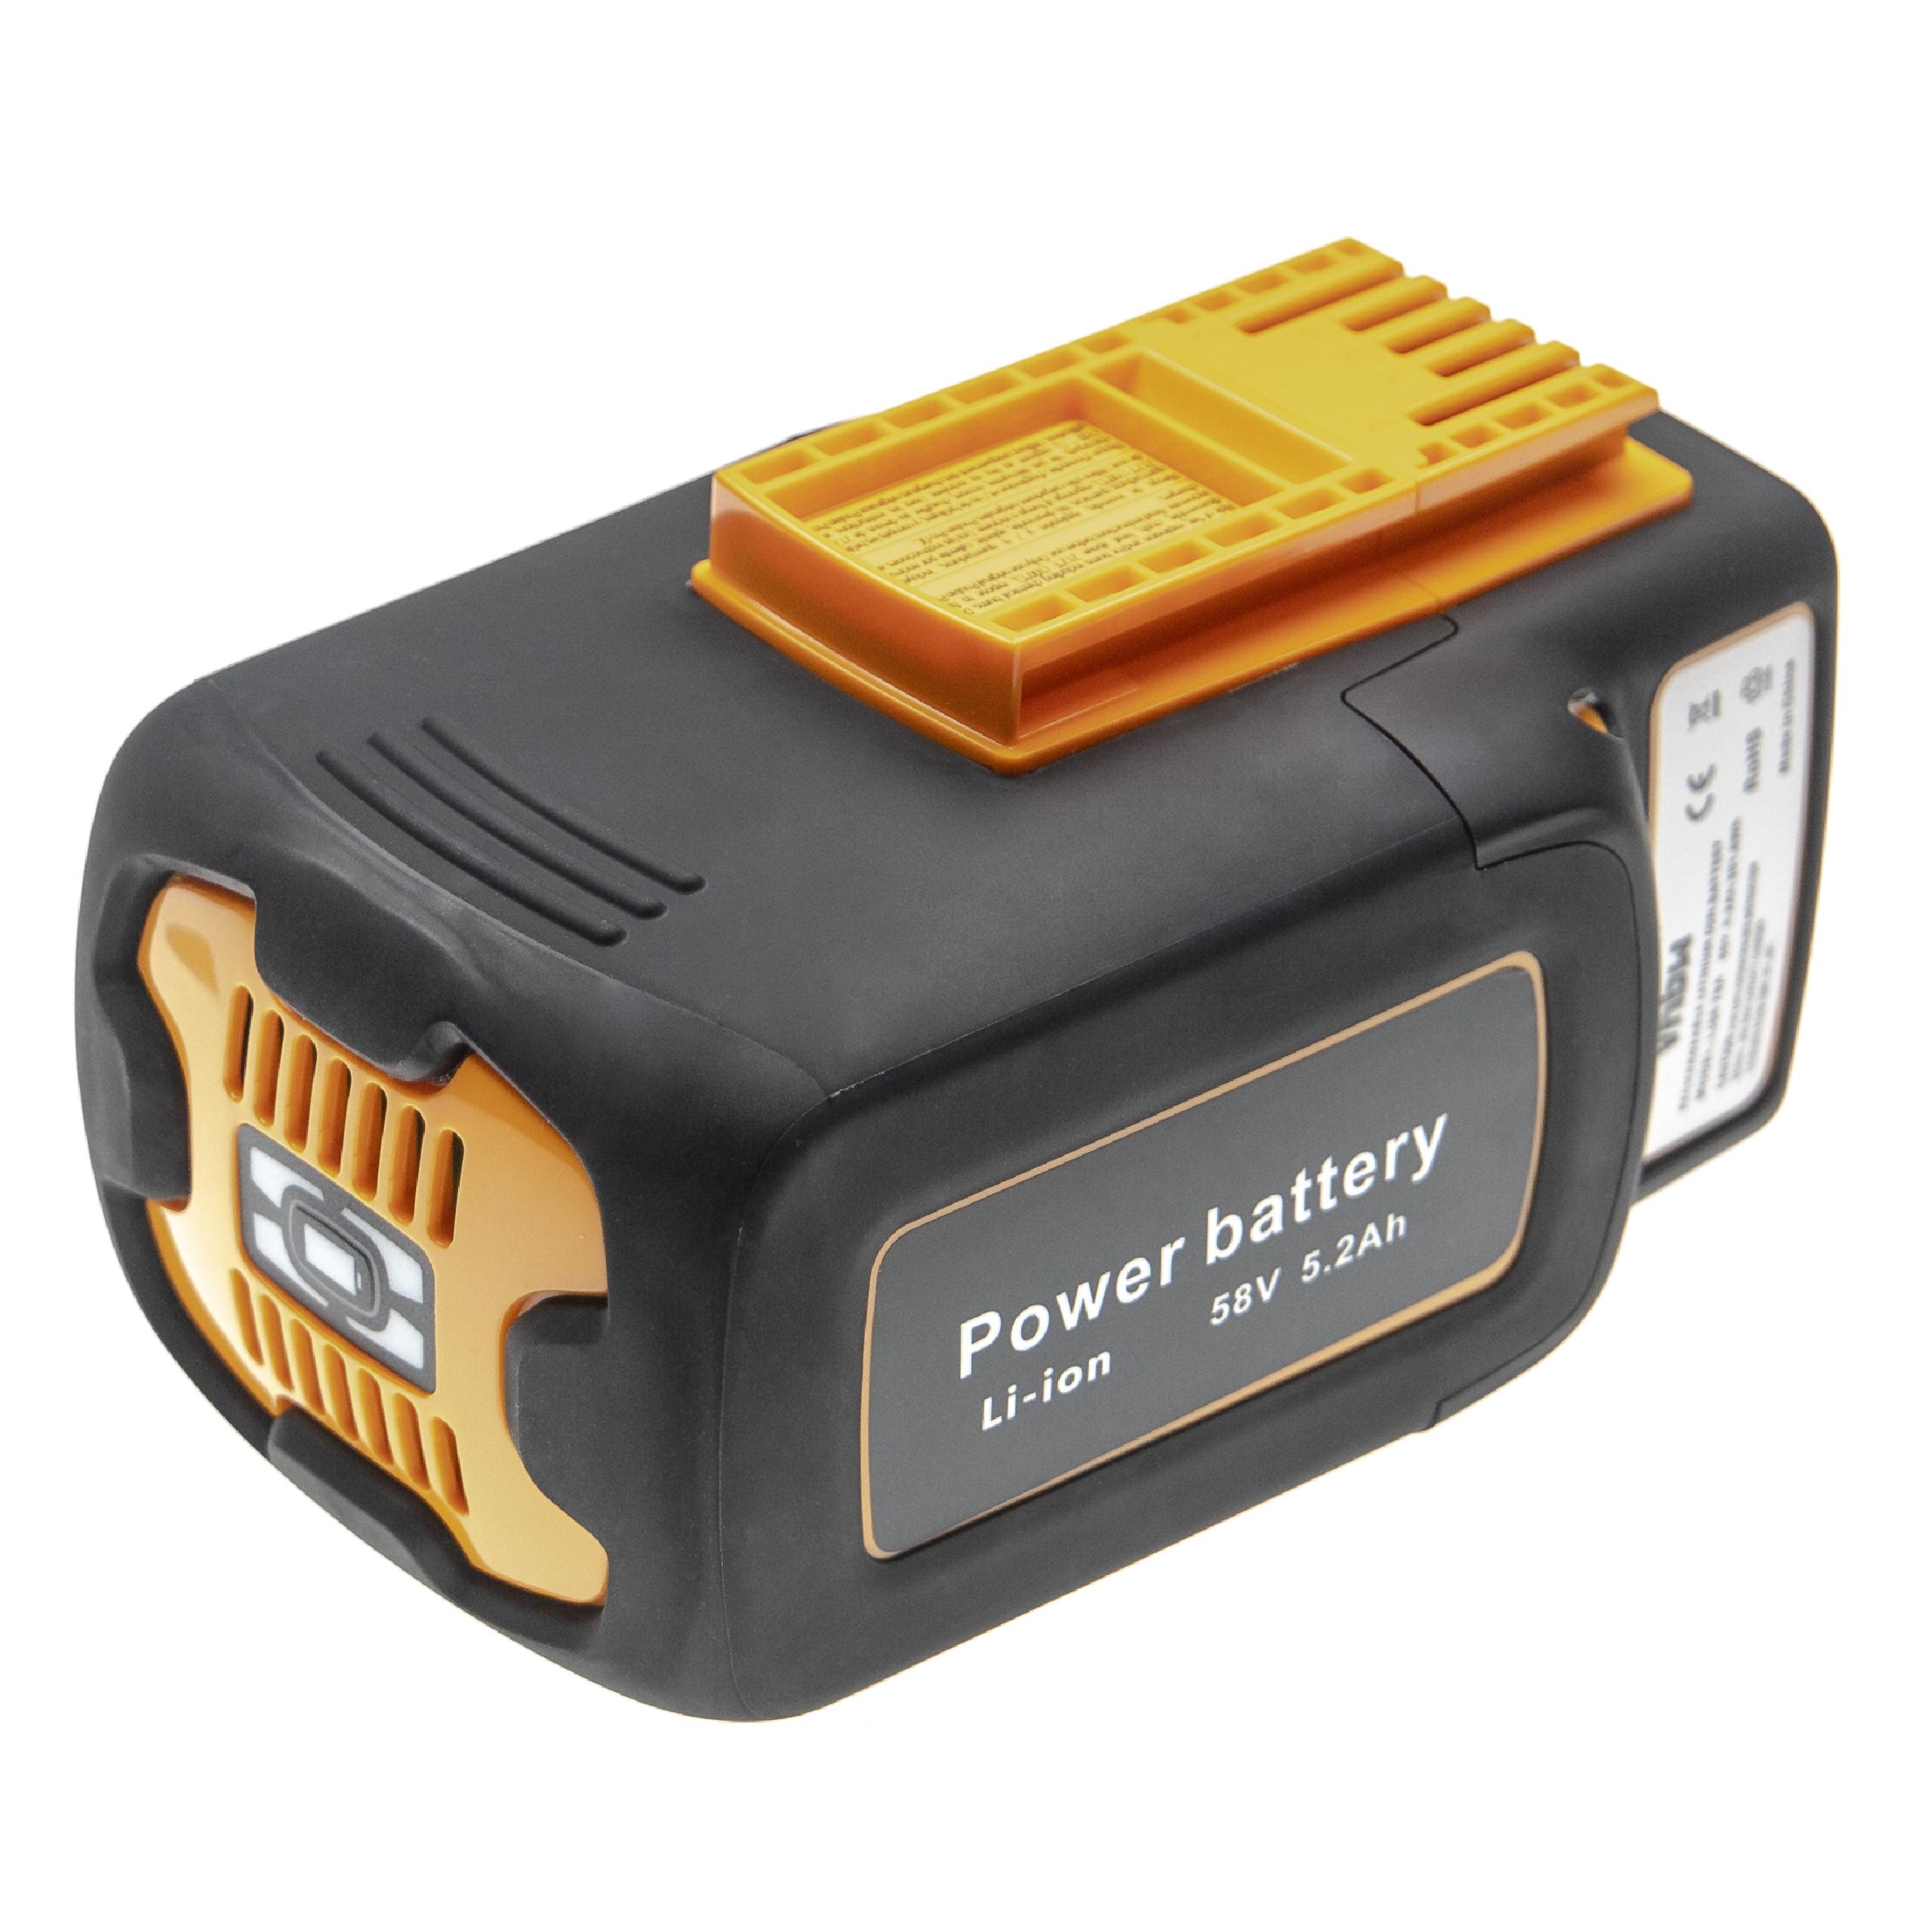 Electric Power Tool Battery Replaces McCulloch 59-09.238.03, 582611701, 590810401 - 5200 mAh, 58 V, Li-Ion